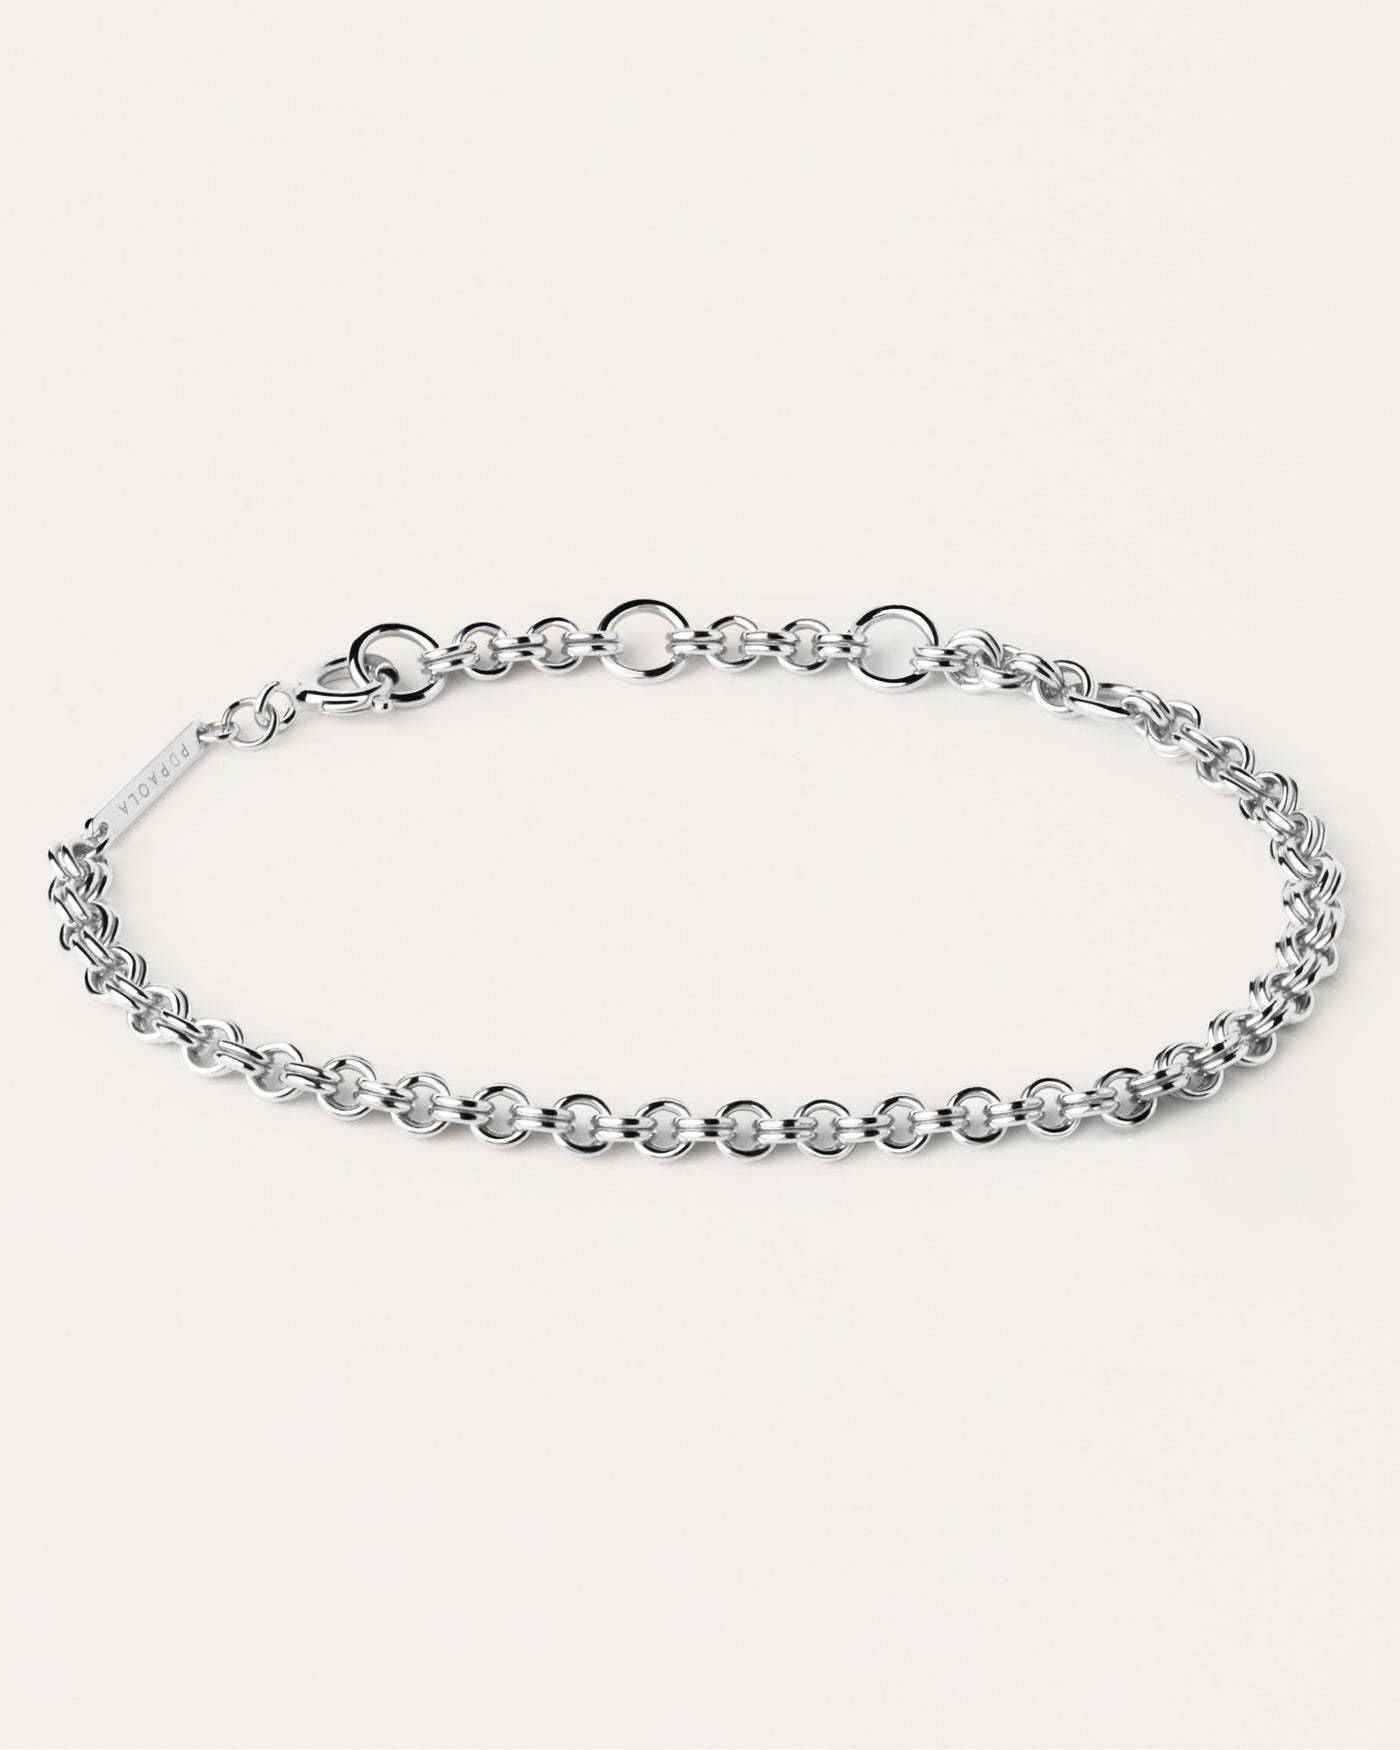 2023 Selection | Neo Silver Bracelet. 925 silver chain bracelet with double cable links. Get the latest arrival from PDPAOLA. Place your order safely and get this Best Seller. Free Shipping.